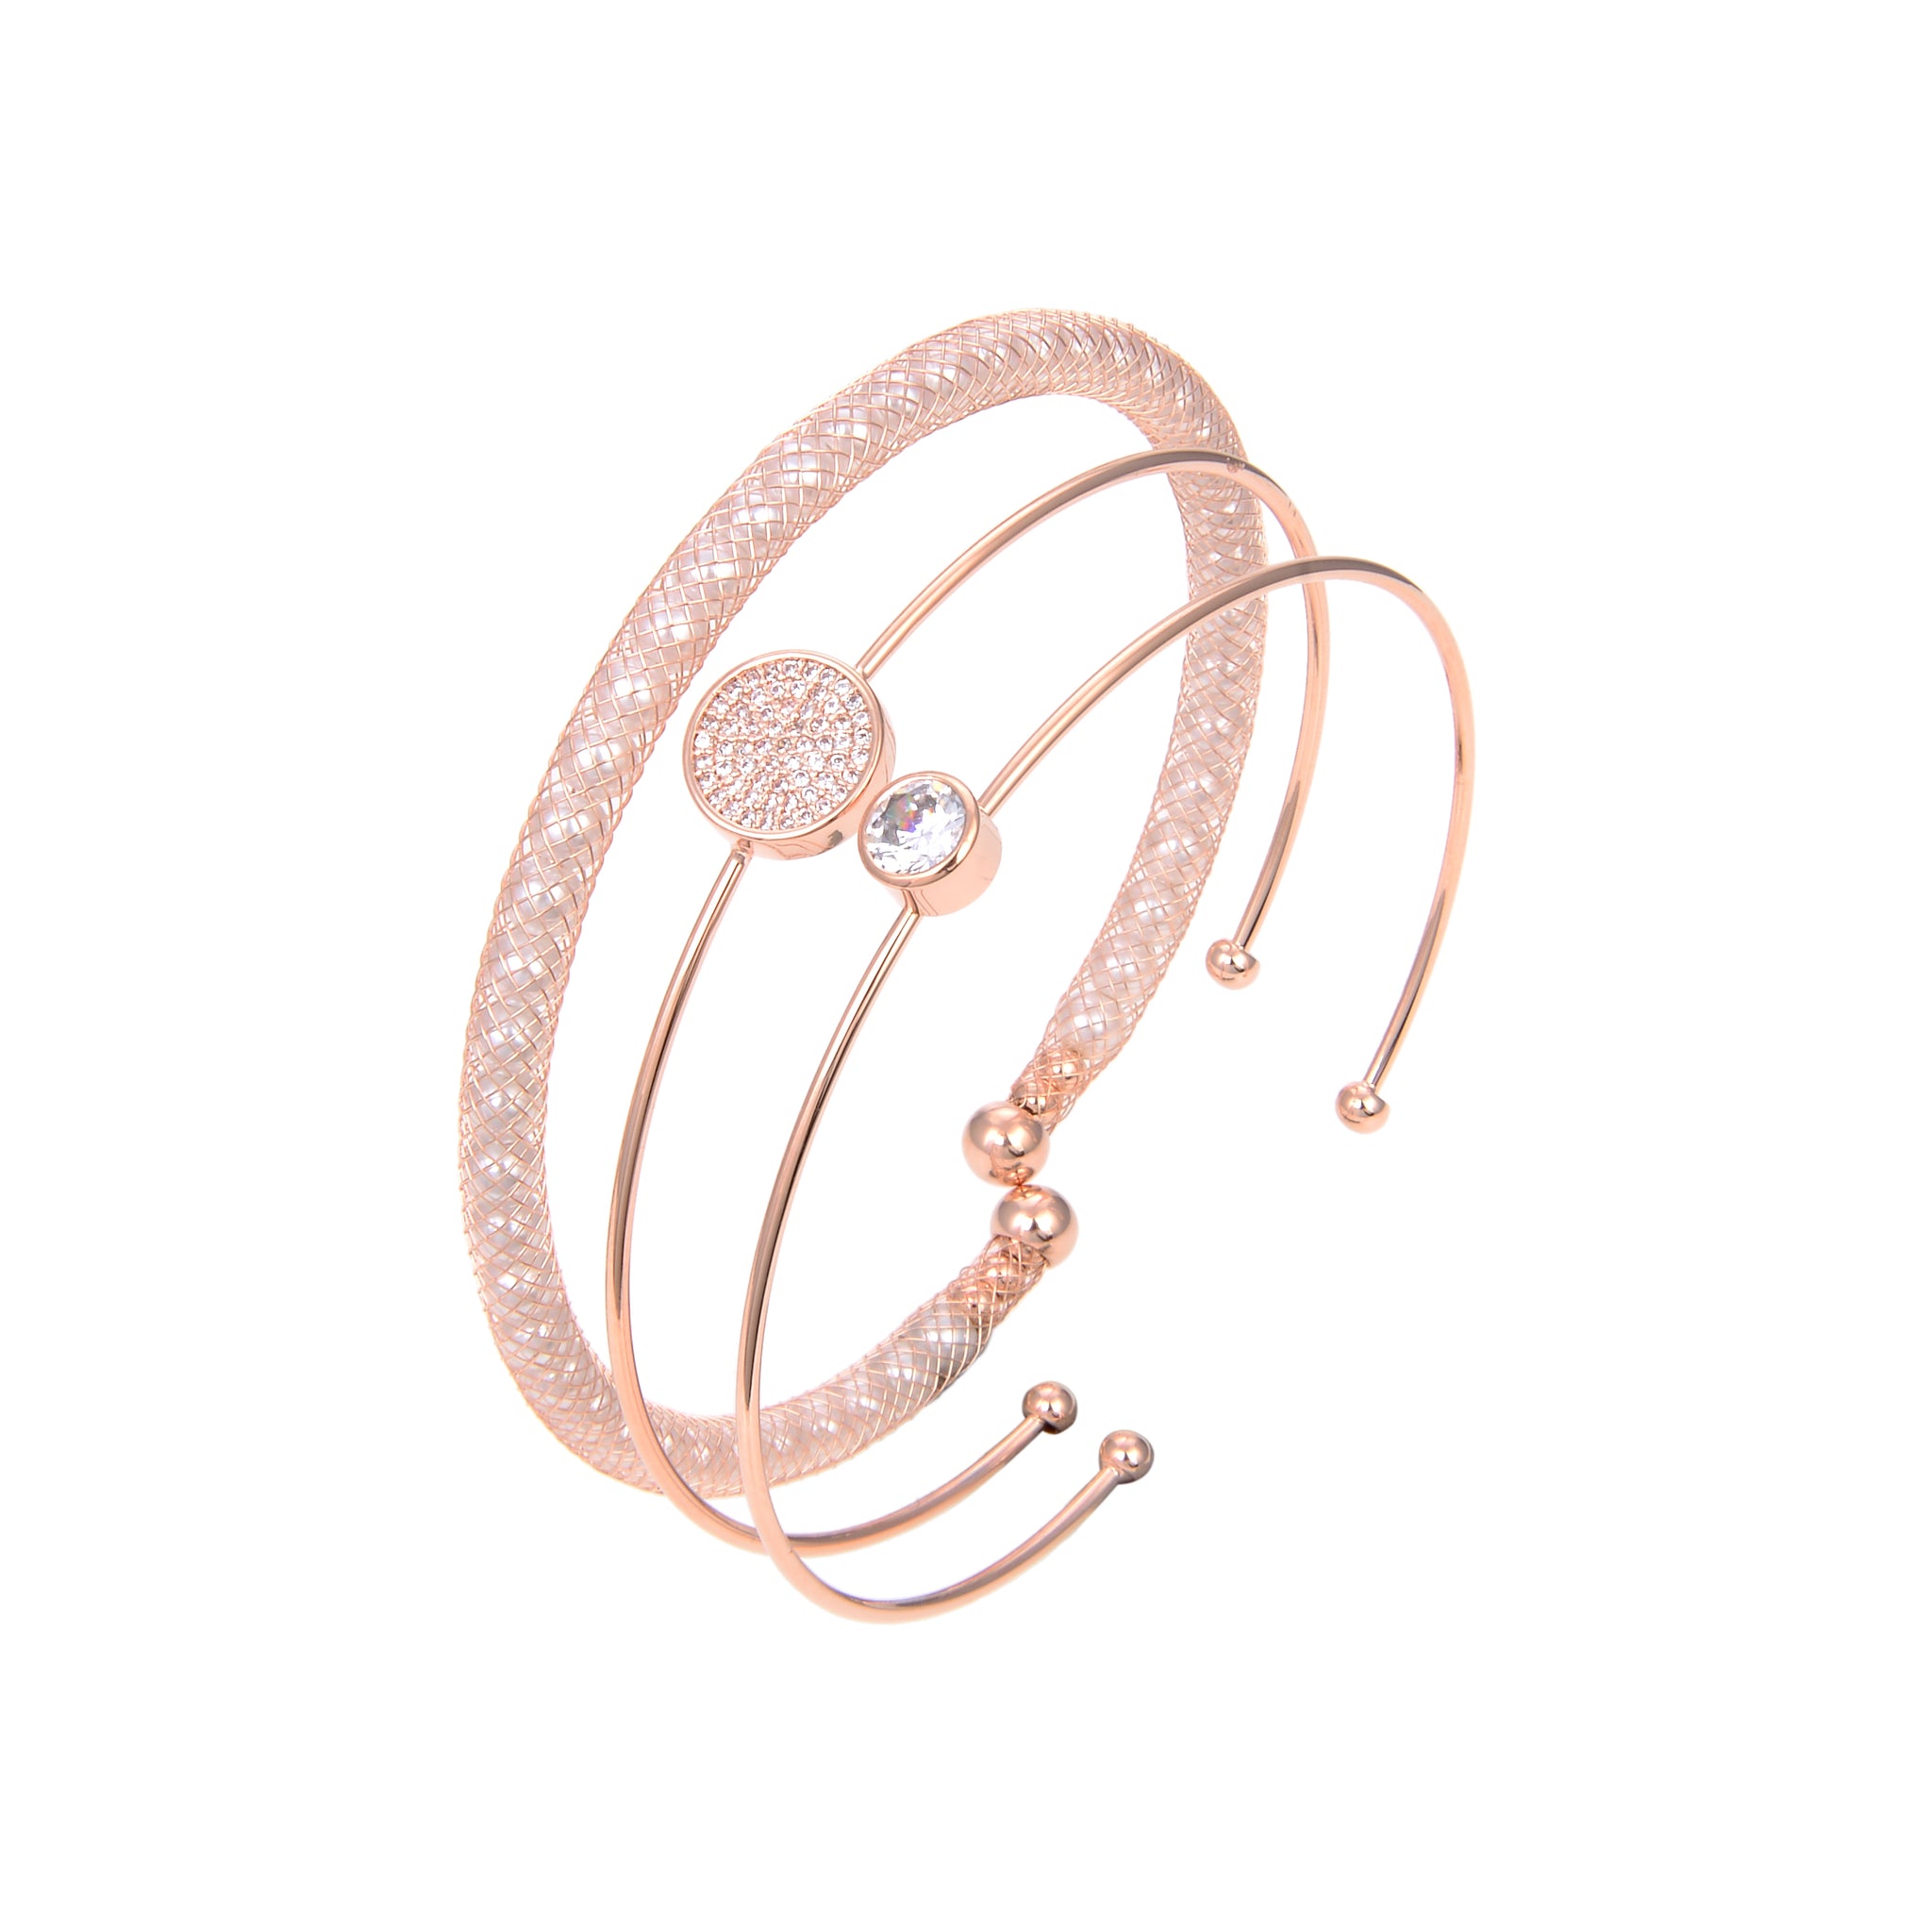 Rose Gold Plated CZ Cubic Zirconia Bangle Bracelet, Rose Gold Bangle Bracelet